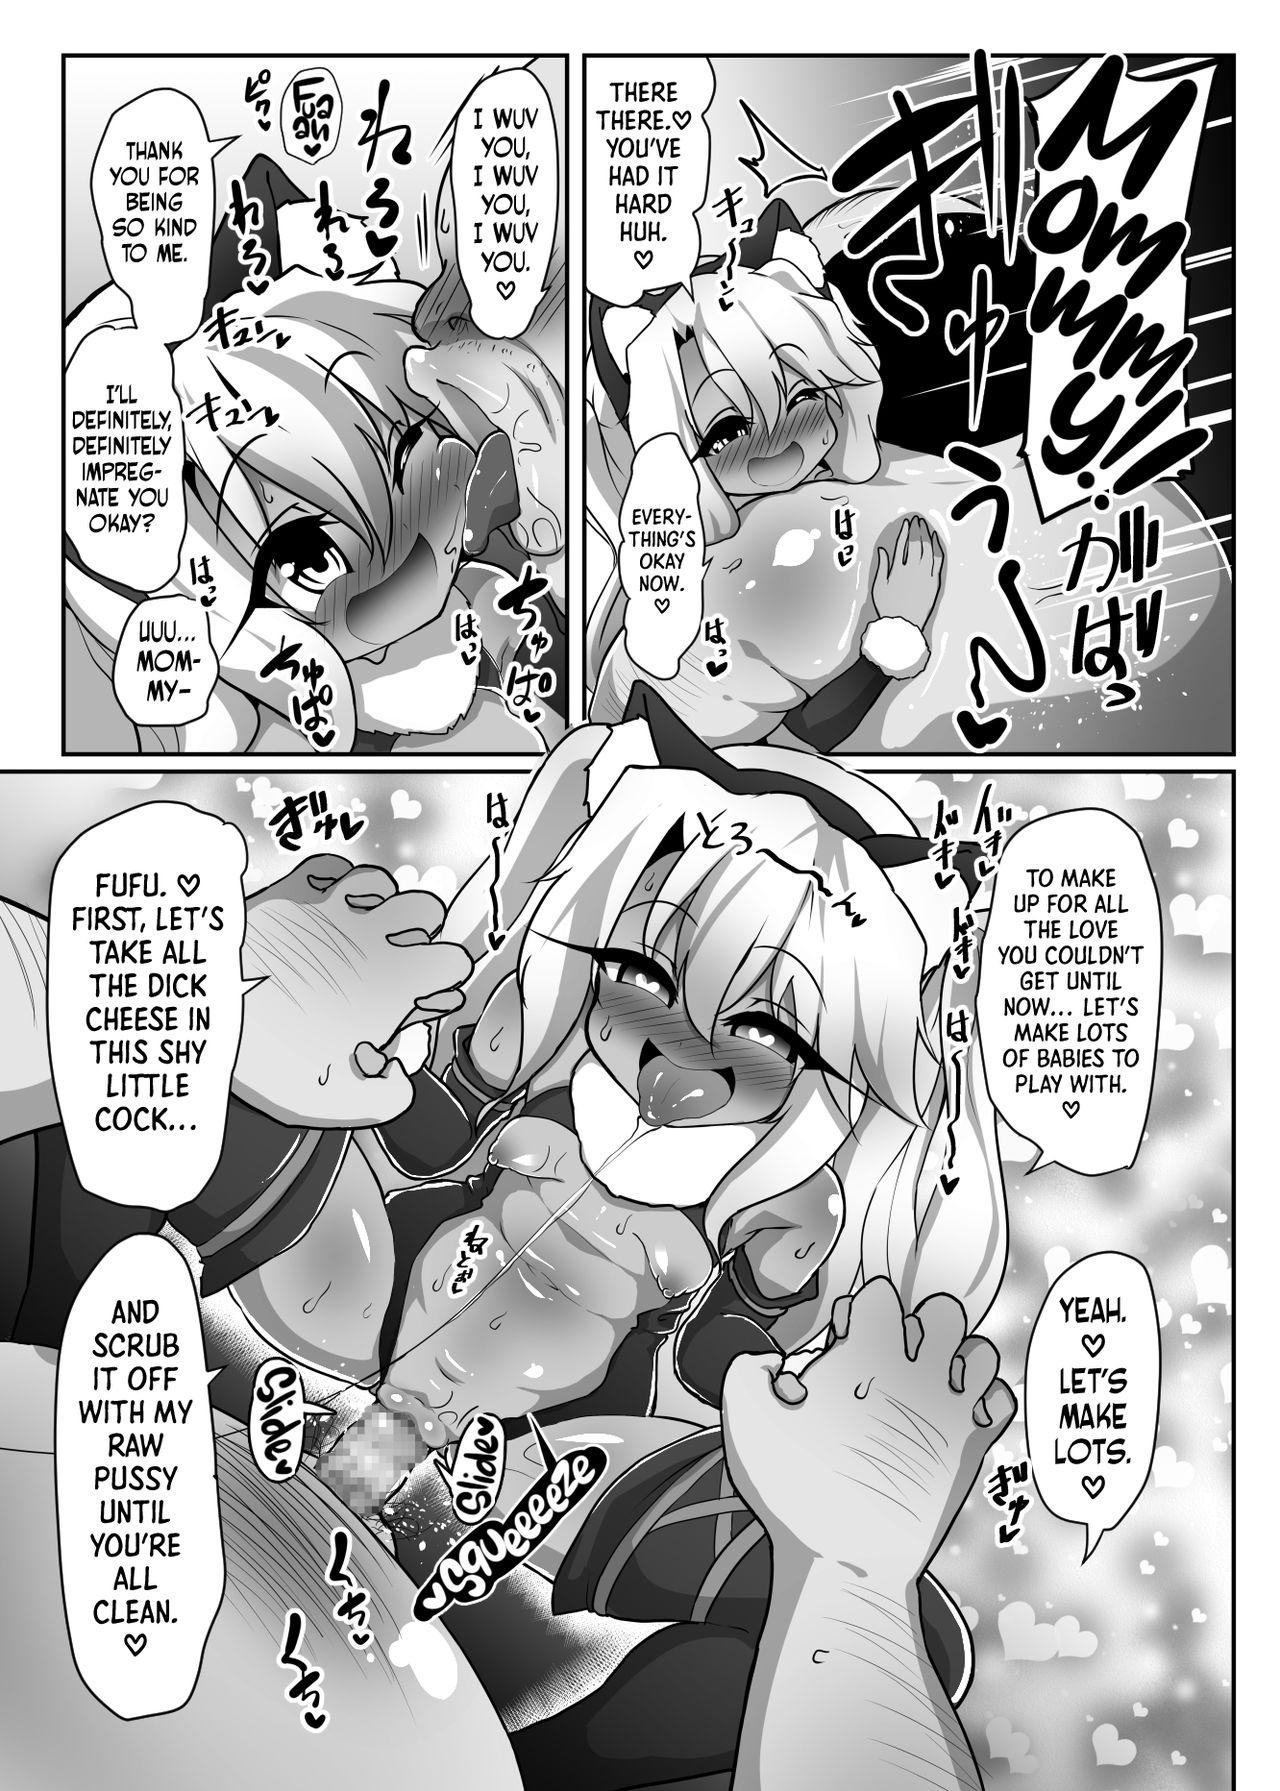 [Kotee] A book where Chloe-chan pretends to be hypnotized and relentlessly gives birth over and over to a disgusting old micro-dicked virgin’s babies. (Fate/kaleid liner Prisma Illya) [English] [Secluded] [Digital] 15